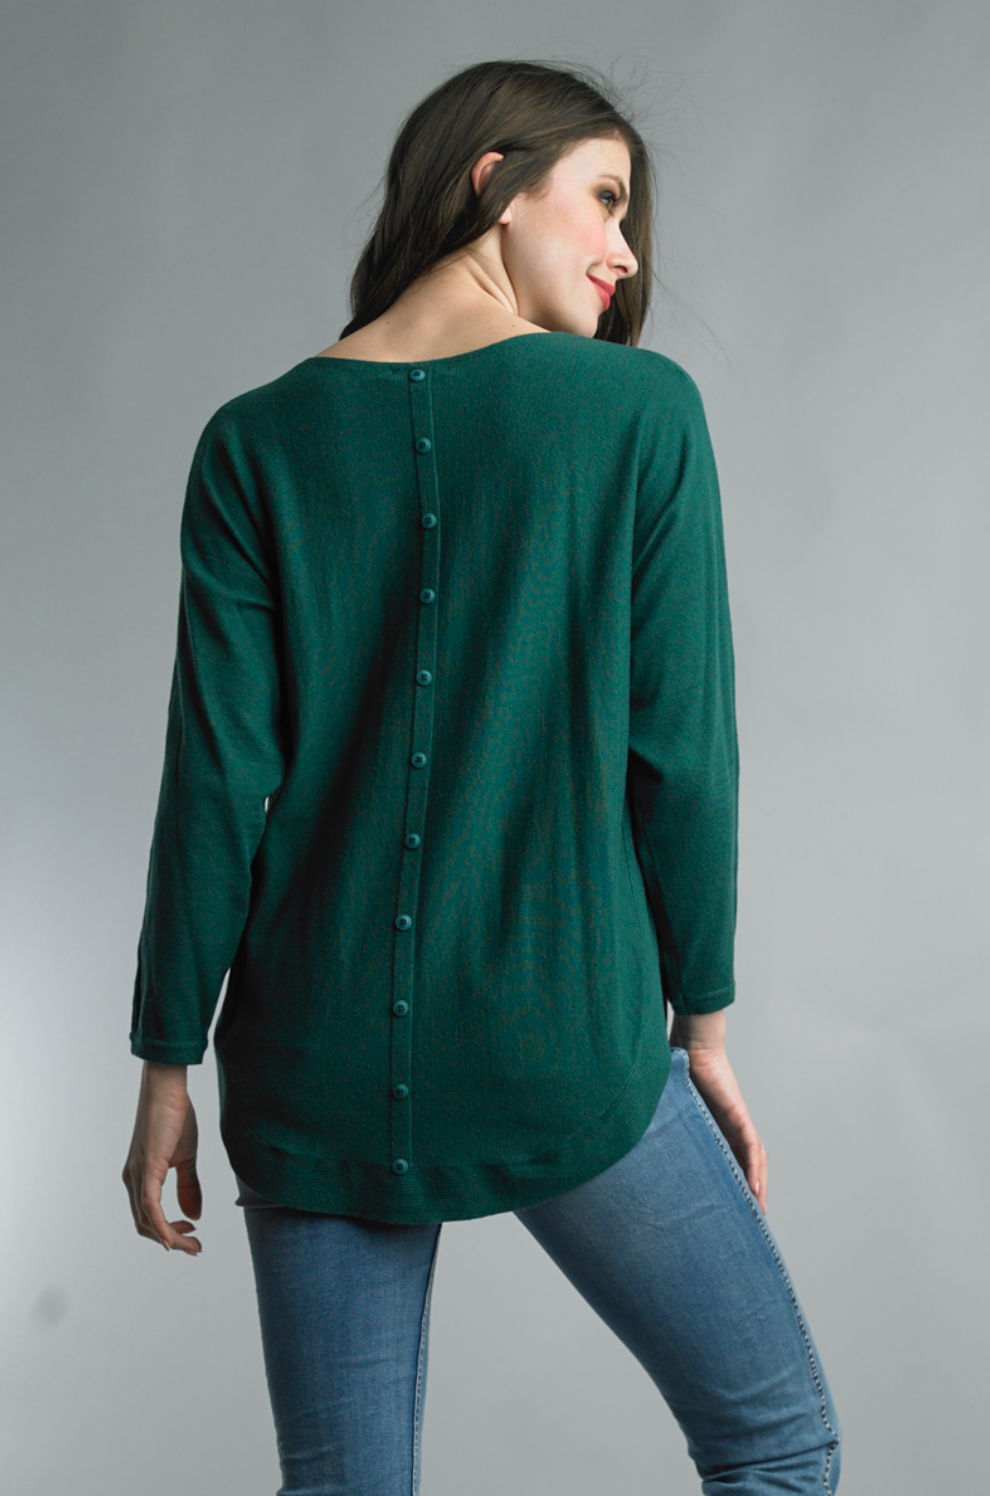 Bailey Button Back Sweater, Forest